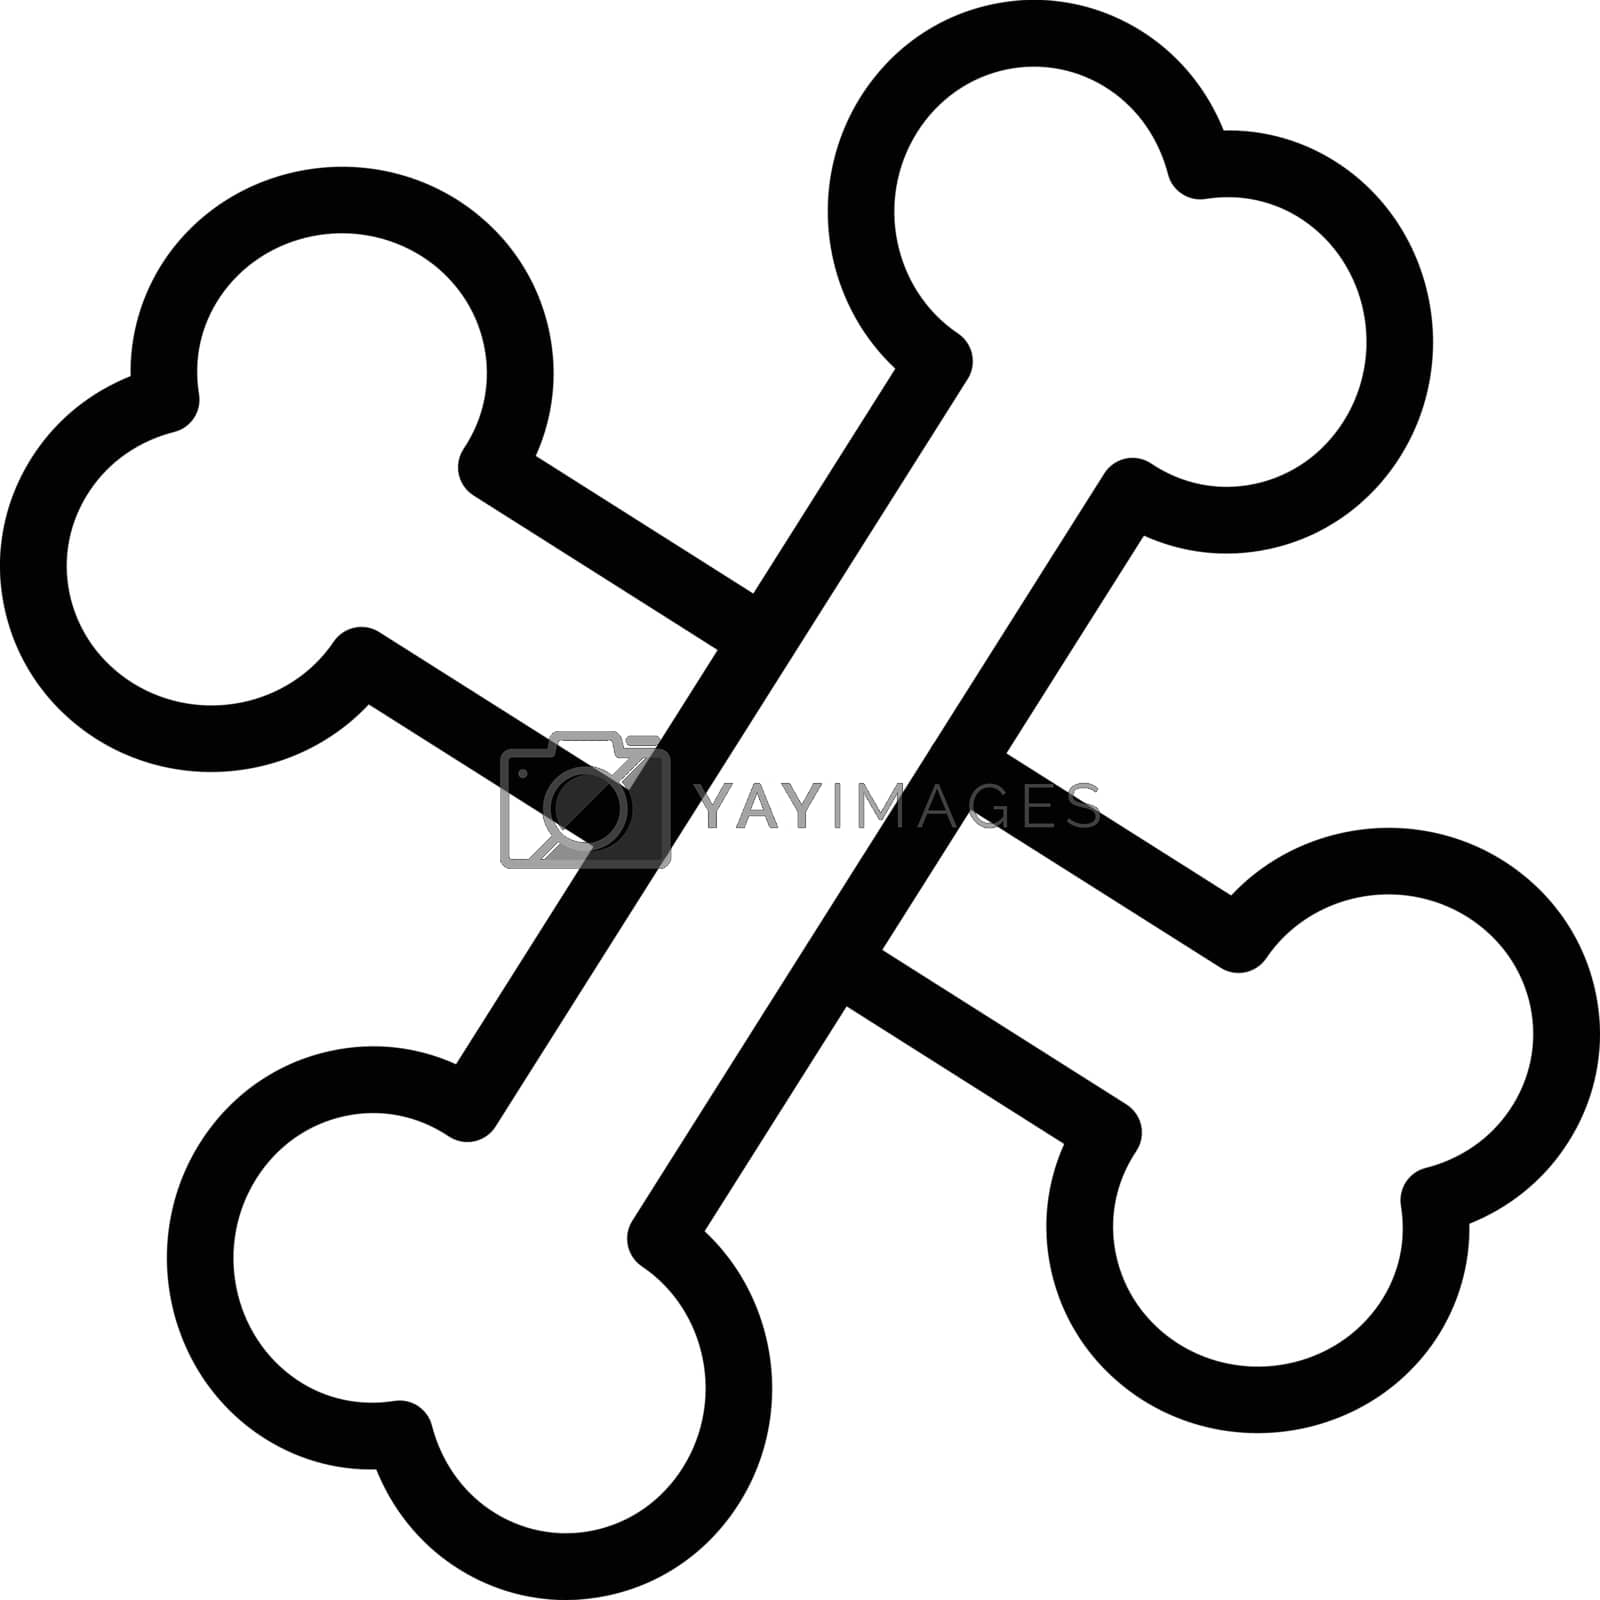 Royalty free image of cross by vectorstall